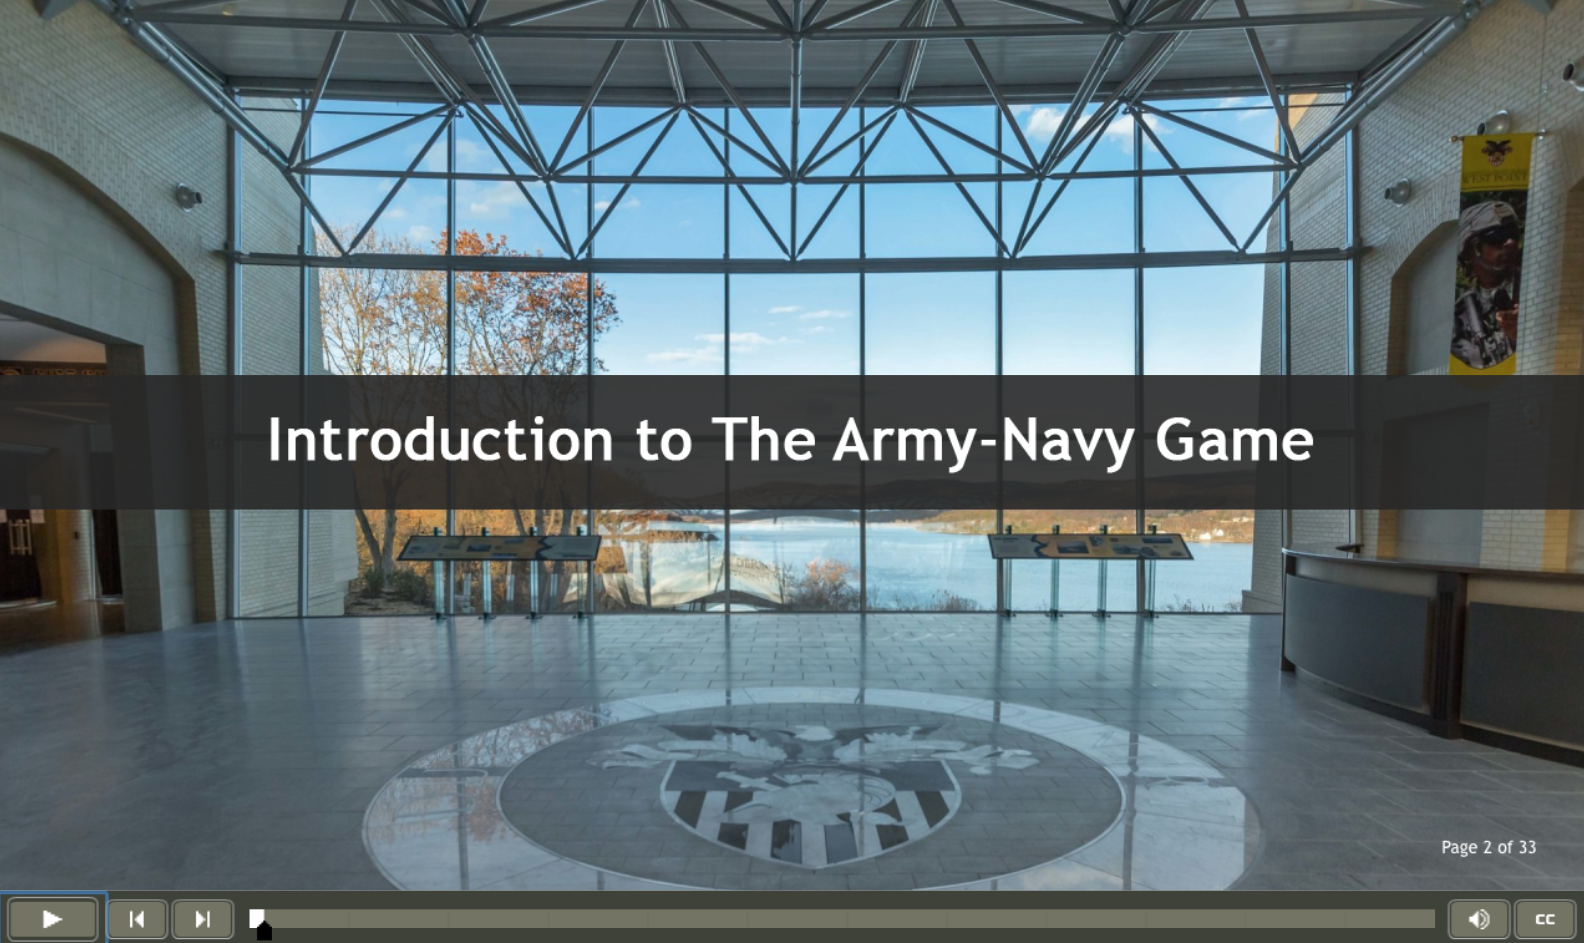 Introduction page for The Army-Navy Game course